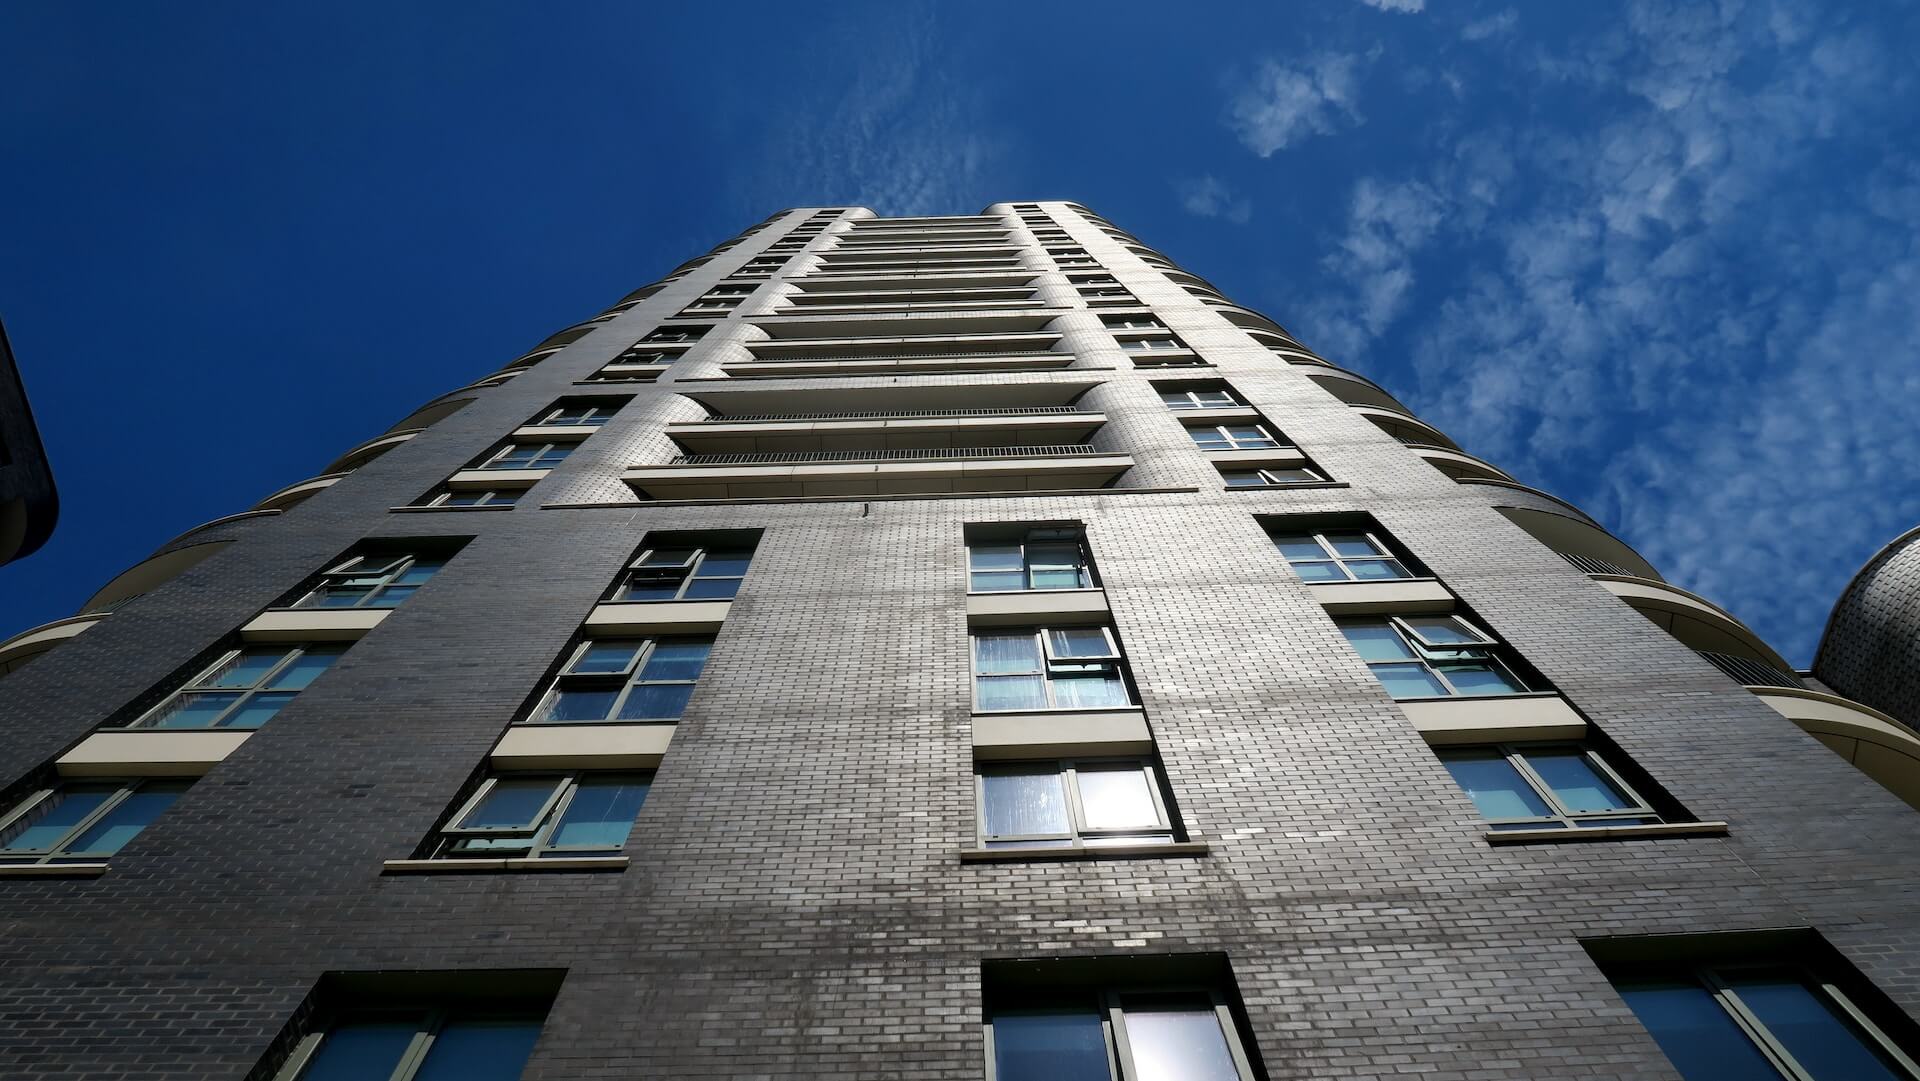 Looking up at a high rise block of flats